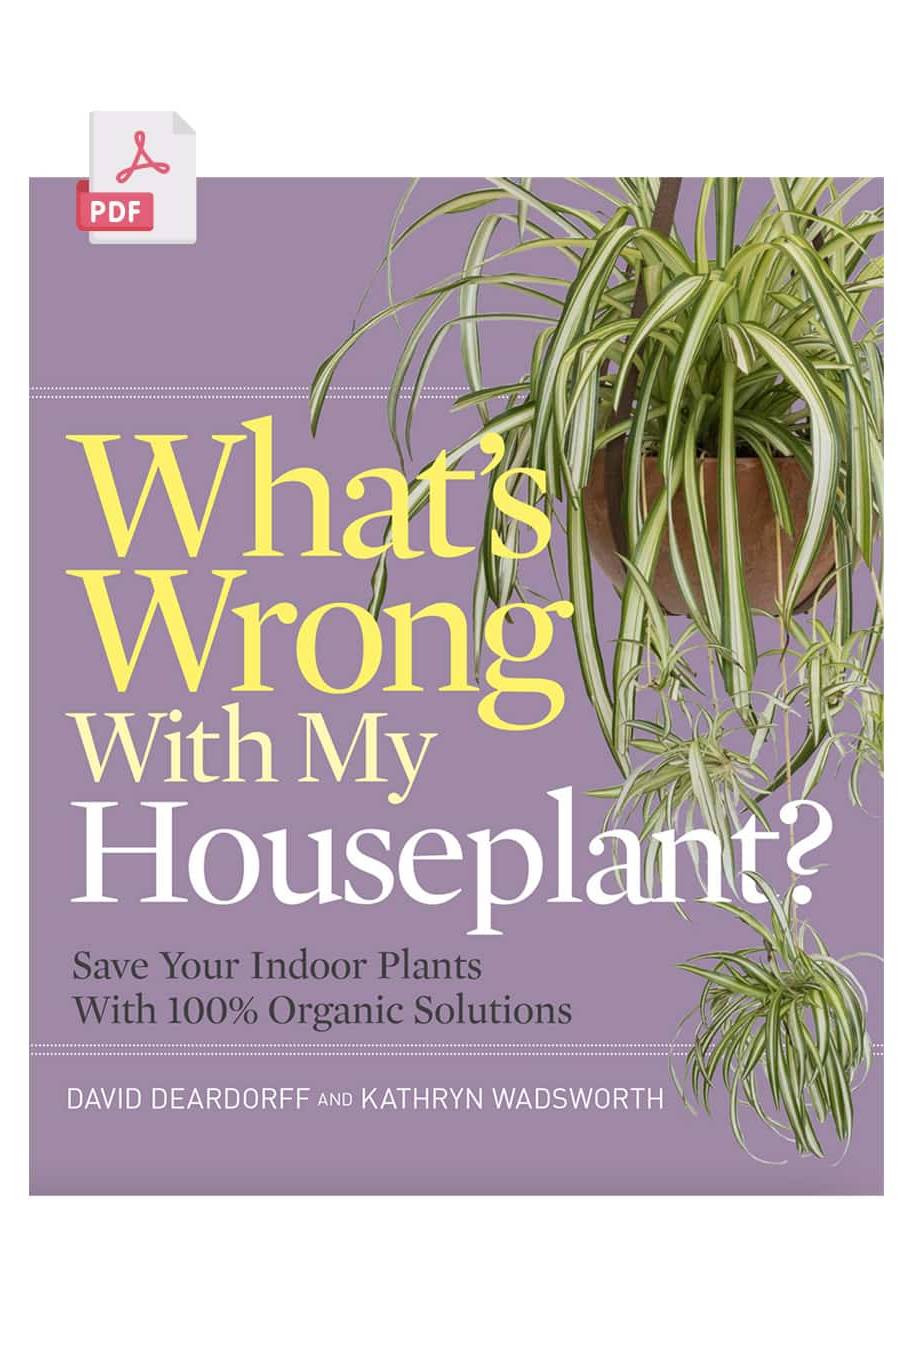 What's Wrong With My Houseplant? - 304 pages